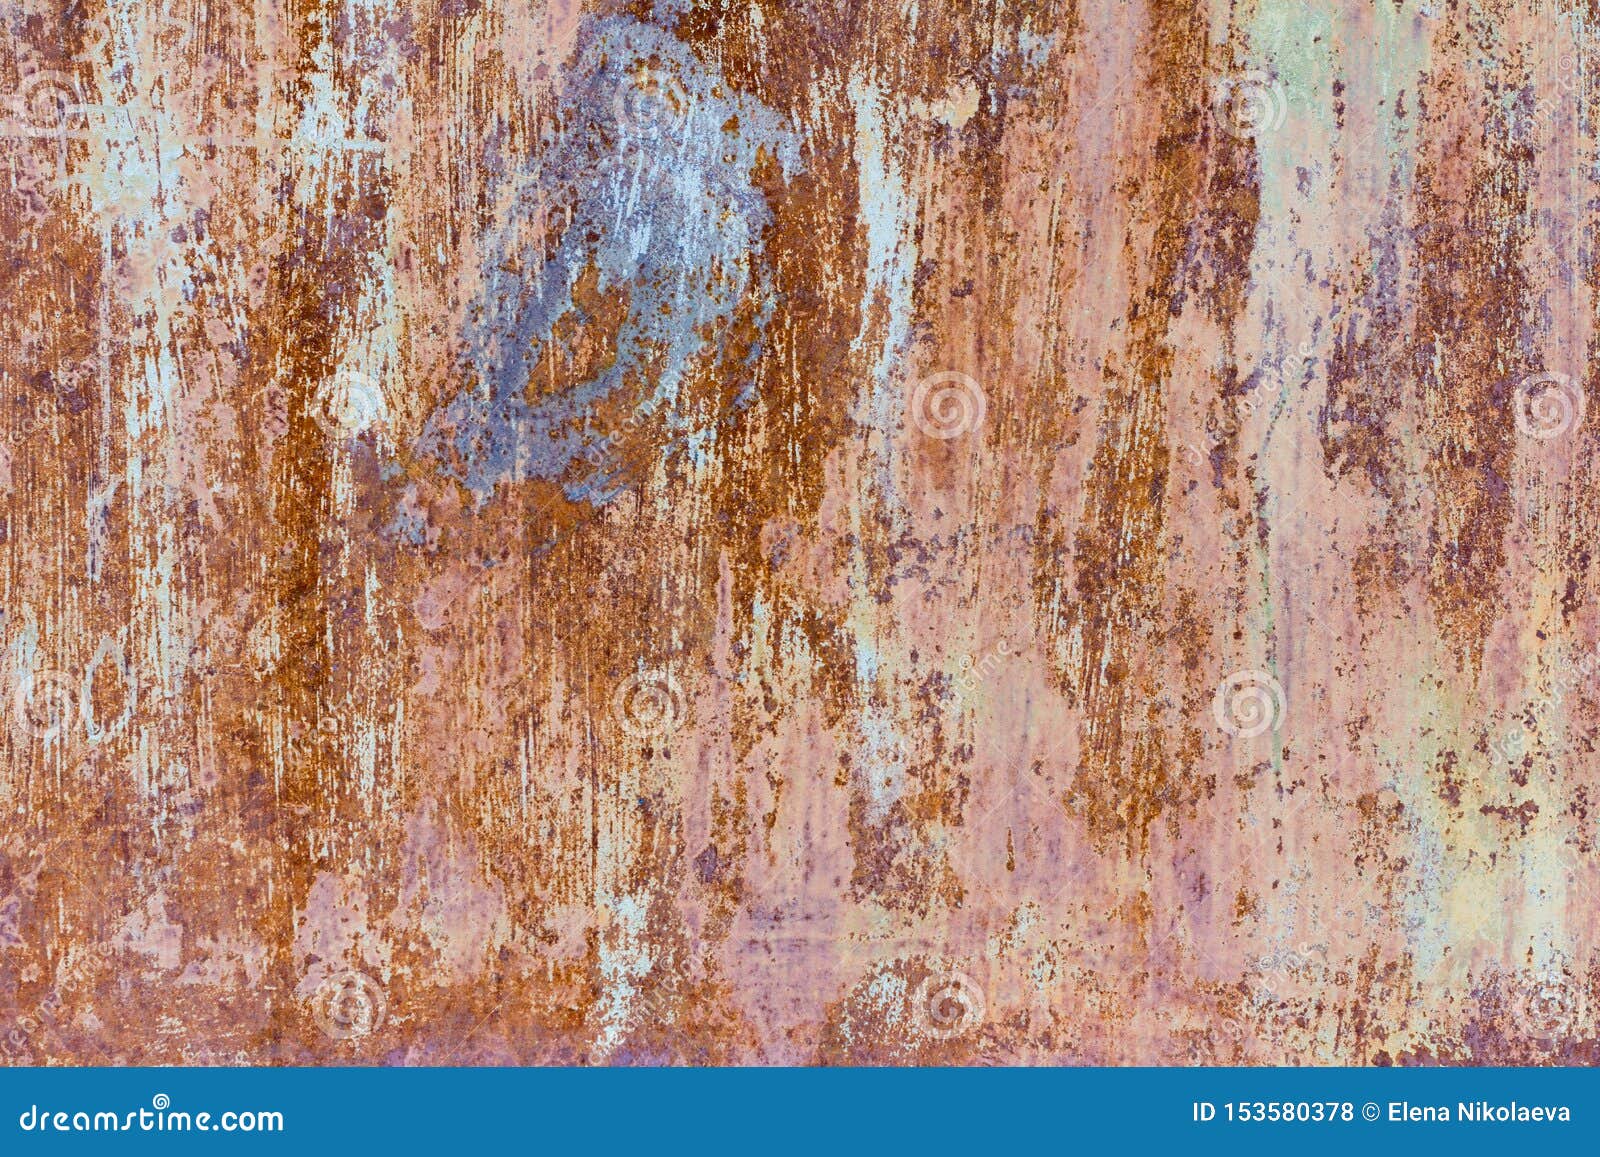 Rust, Rusty Metal Wall, Old Metal Sheet Covered With Paint, Rust And Scratches Stock Photo